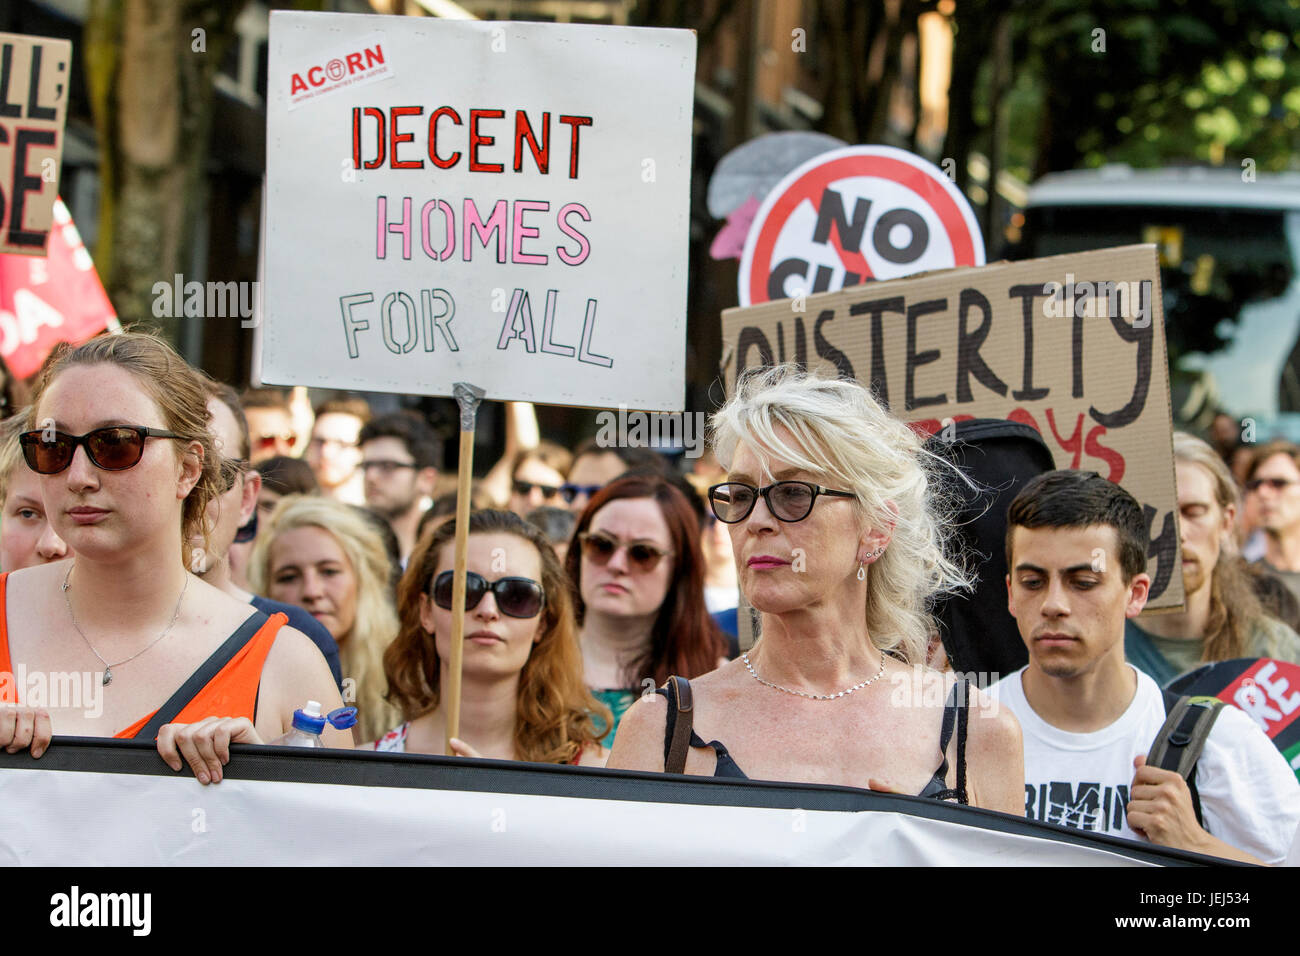 Protesters carrying placards and signs are pictured as they take part in a  Austerity kills, Justice for Grenfell protest march in Bristol. Stock Photo